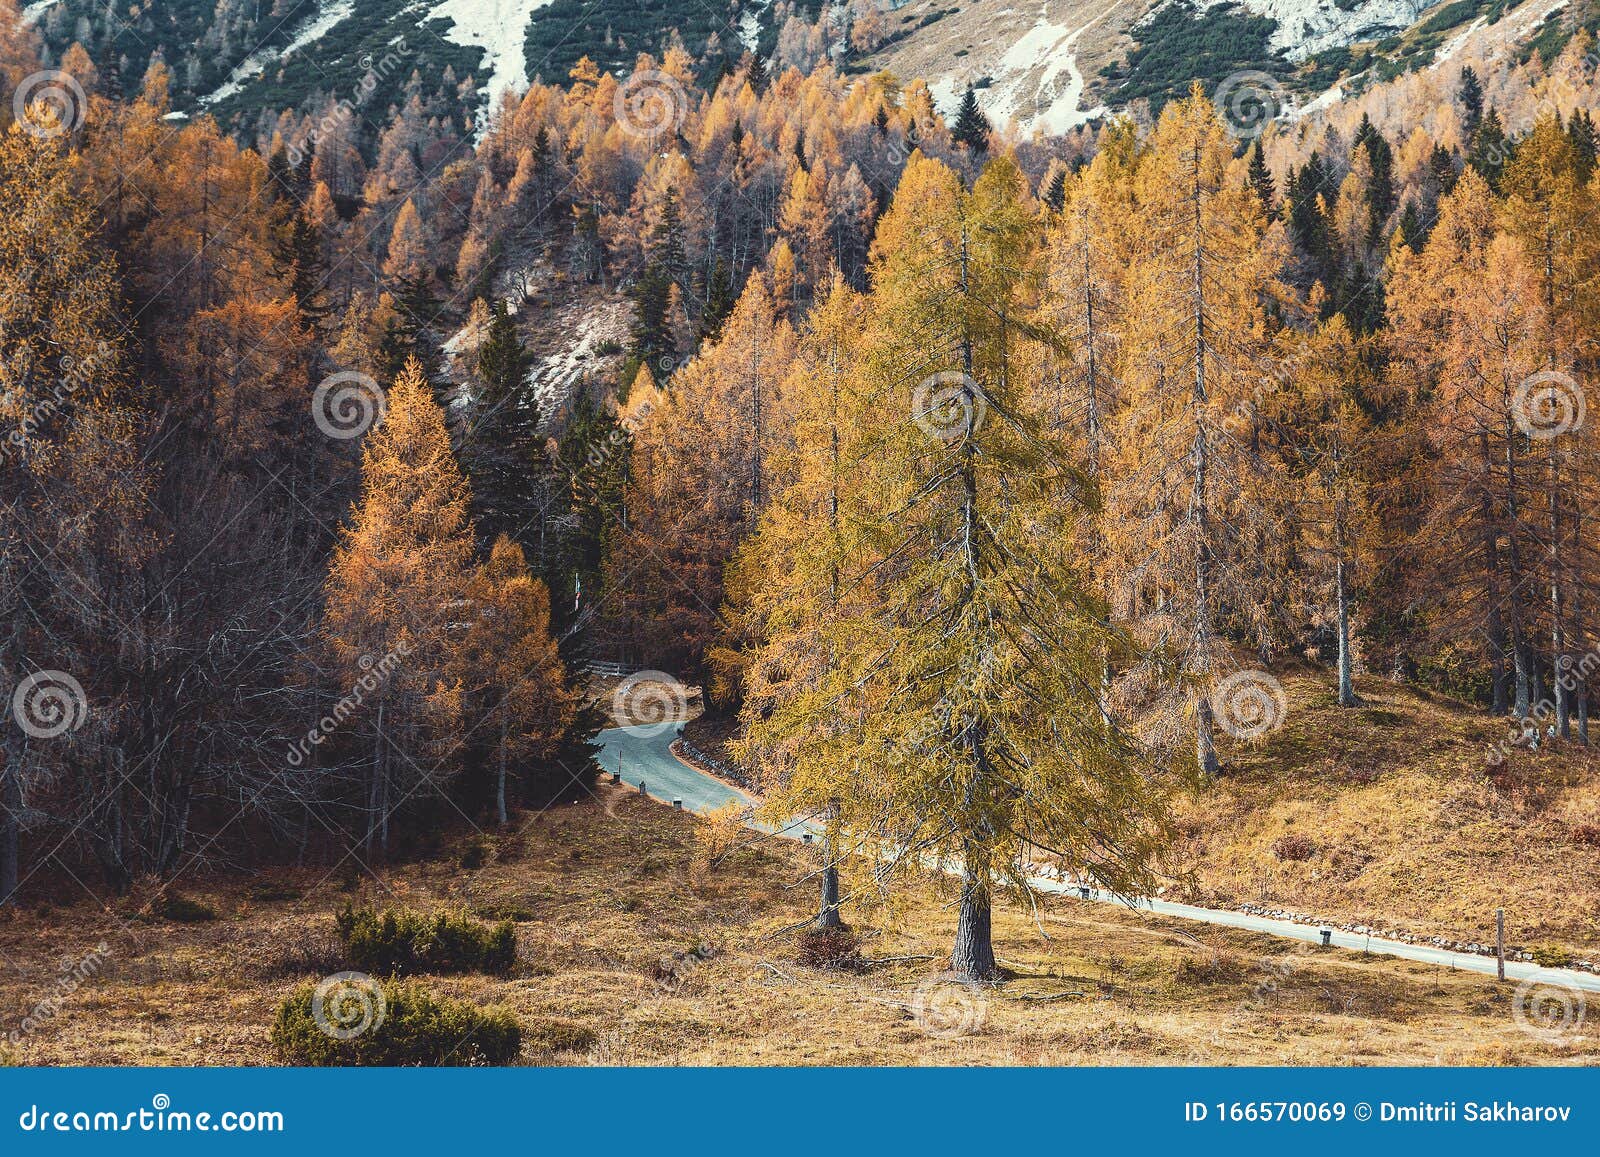 vrsic pass - alpine road in slovenia surrounded by colorful trees in autumn